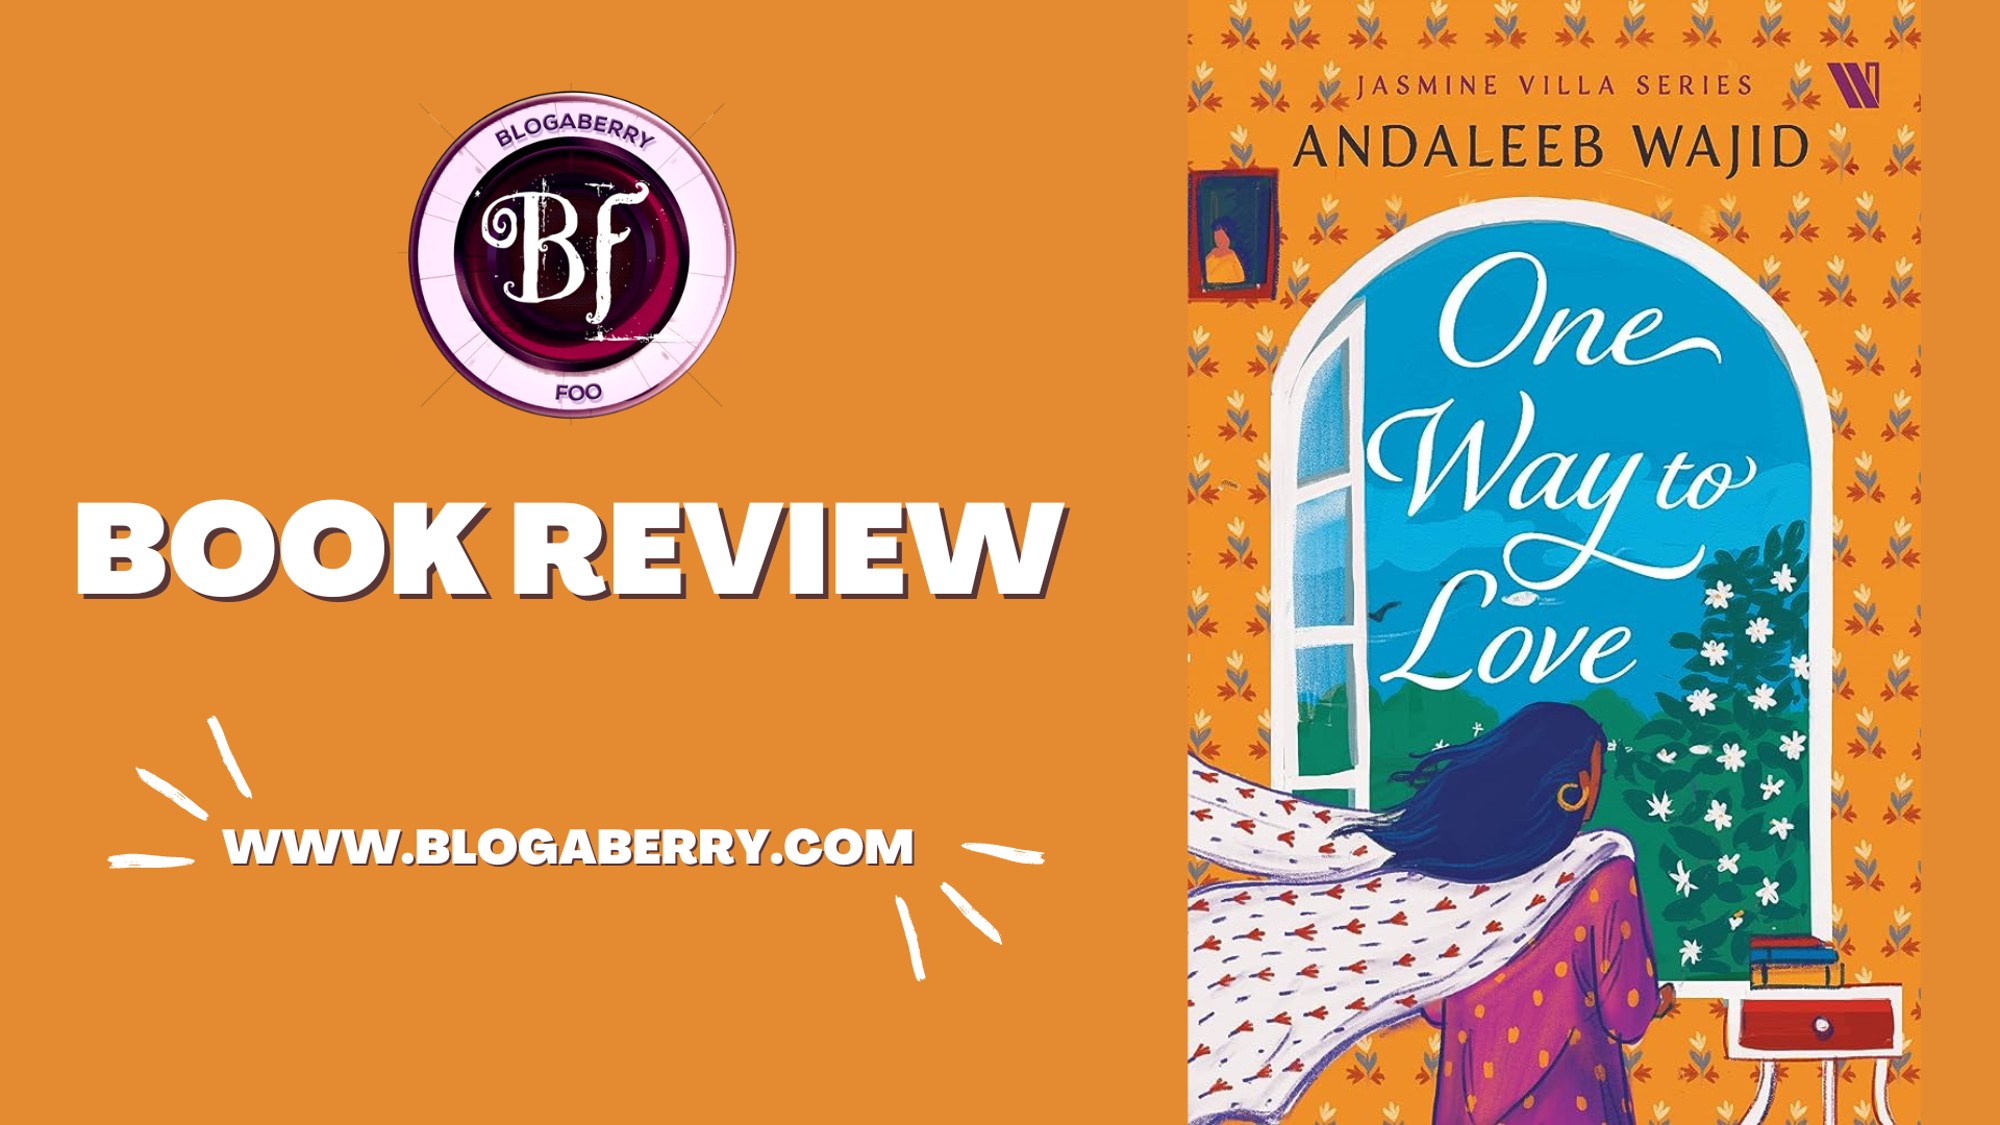 BOOK REVIEW – ONE WAY TO LOVE BY ANDALEEB WAJID